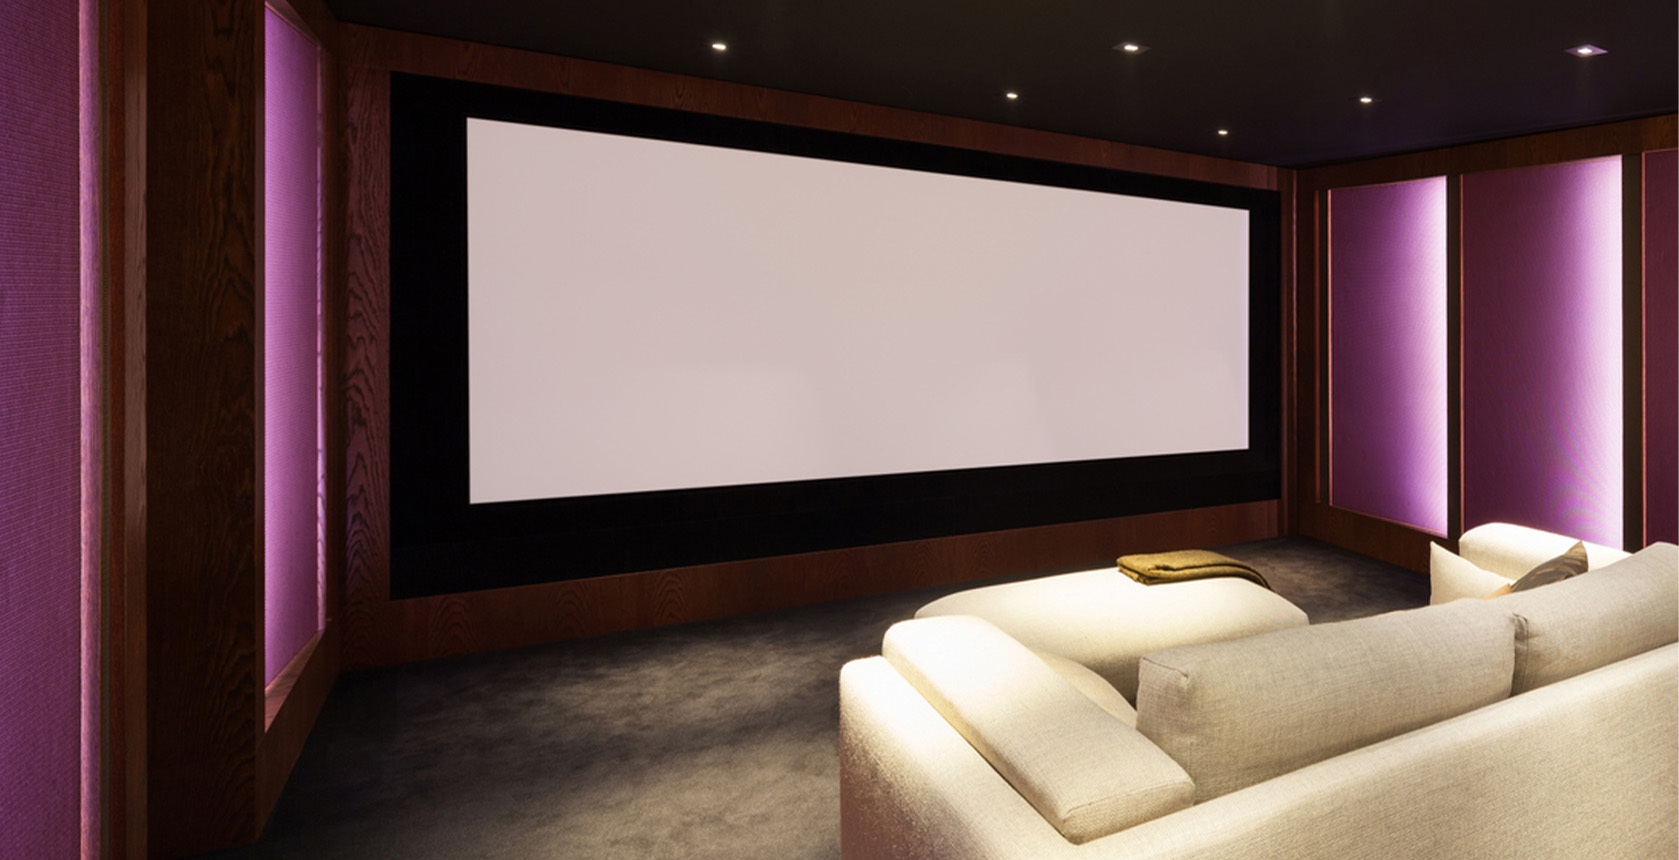 How much does it cost to set up a home cinema?